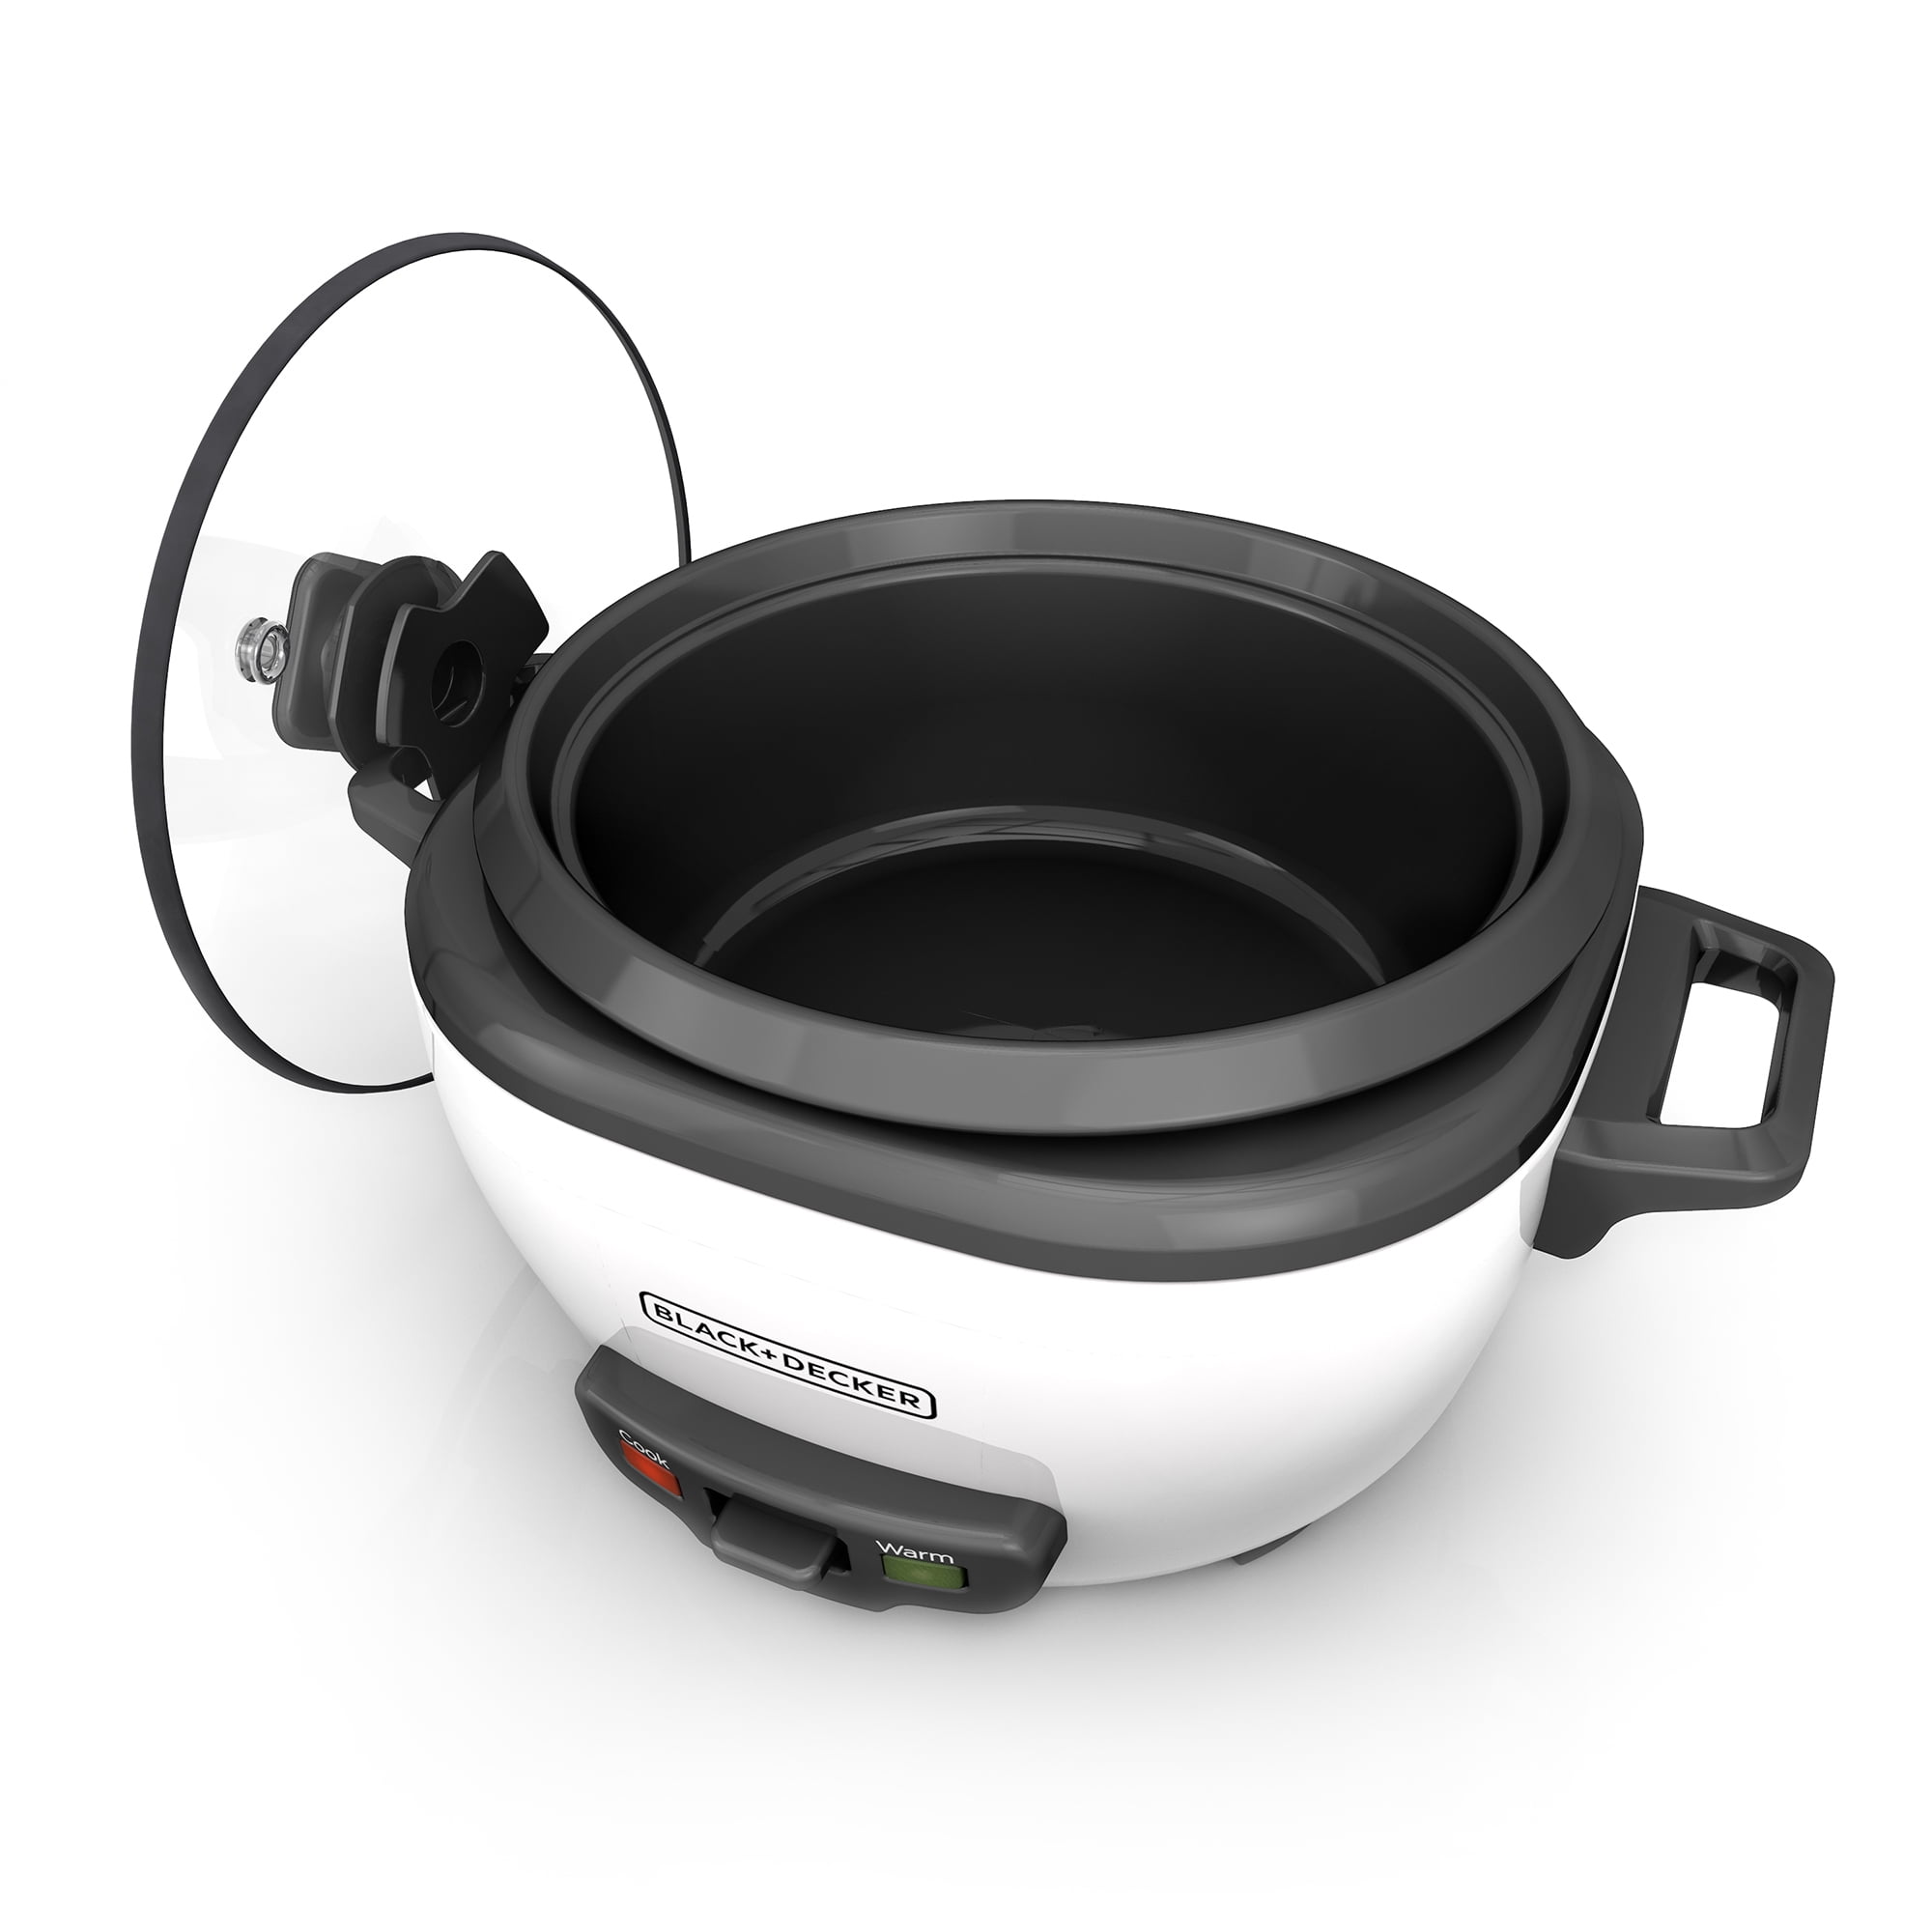 BLACK+DECKER RC1412S 6-Cup Dry/12-Cup Cooked Rice Cooker, Silver 